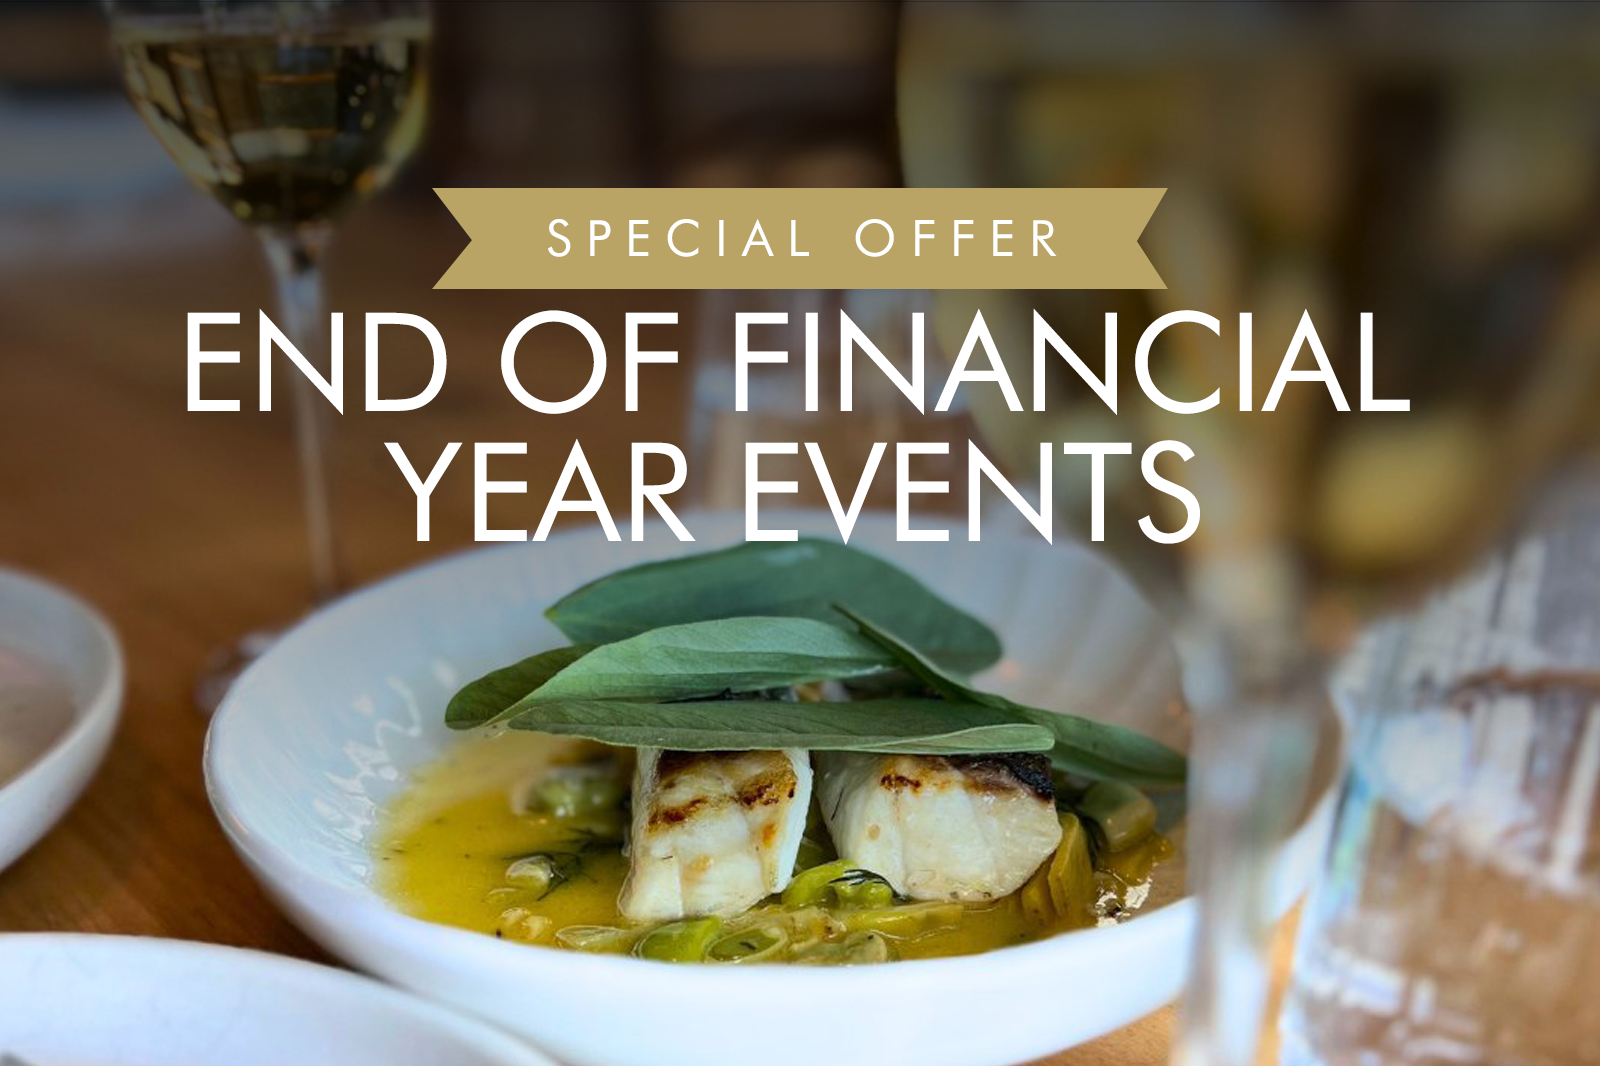 A Very Special Offer for End of Financial Year Events